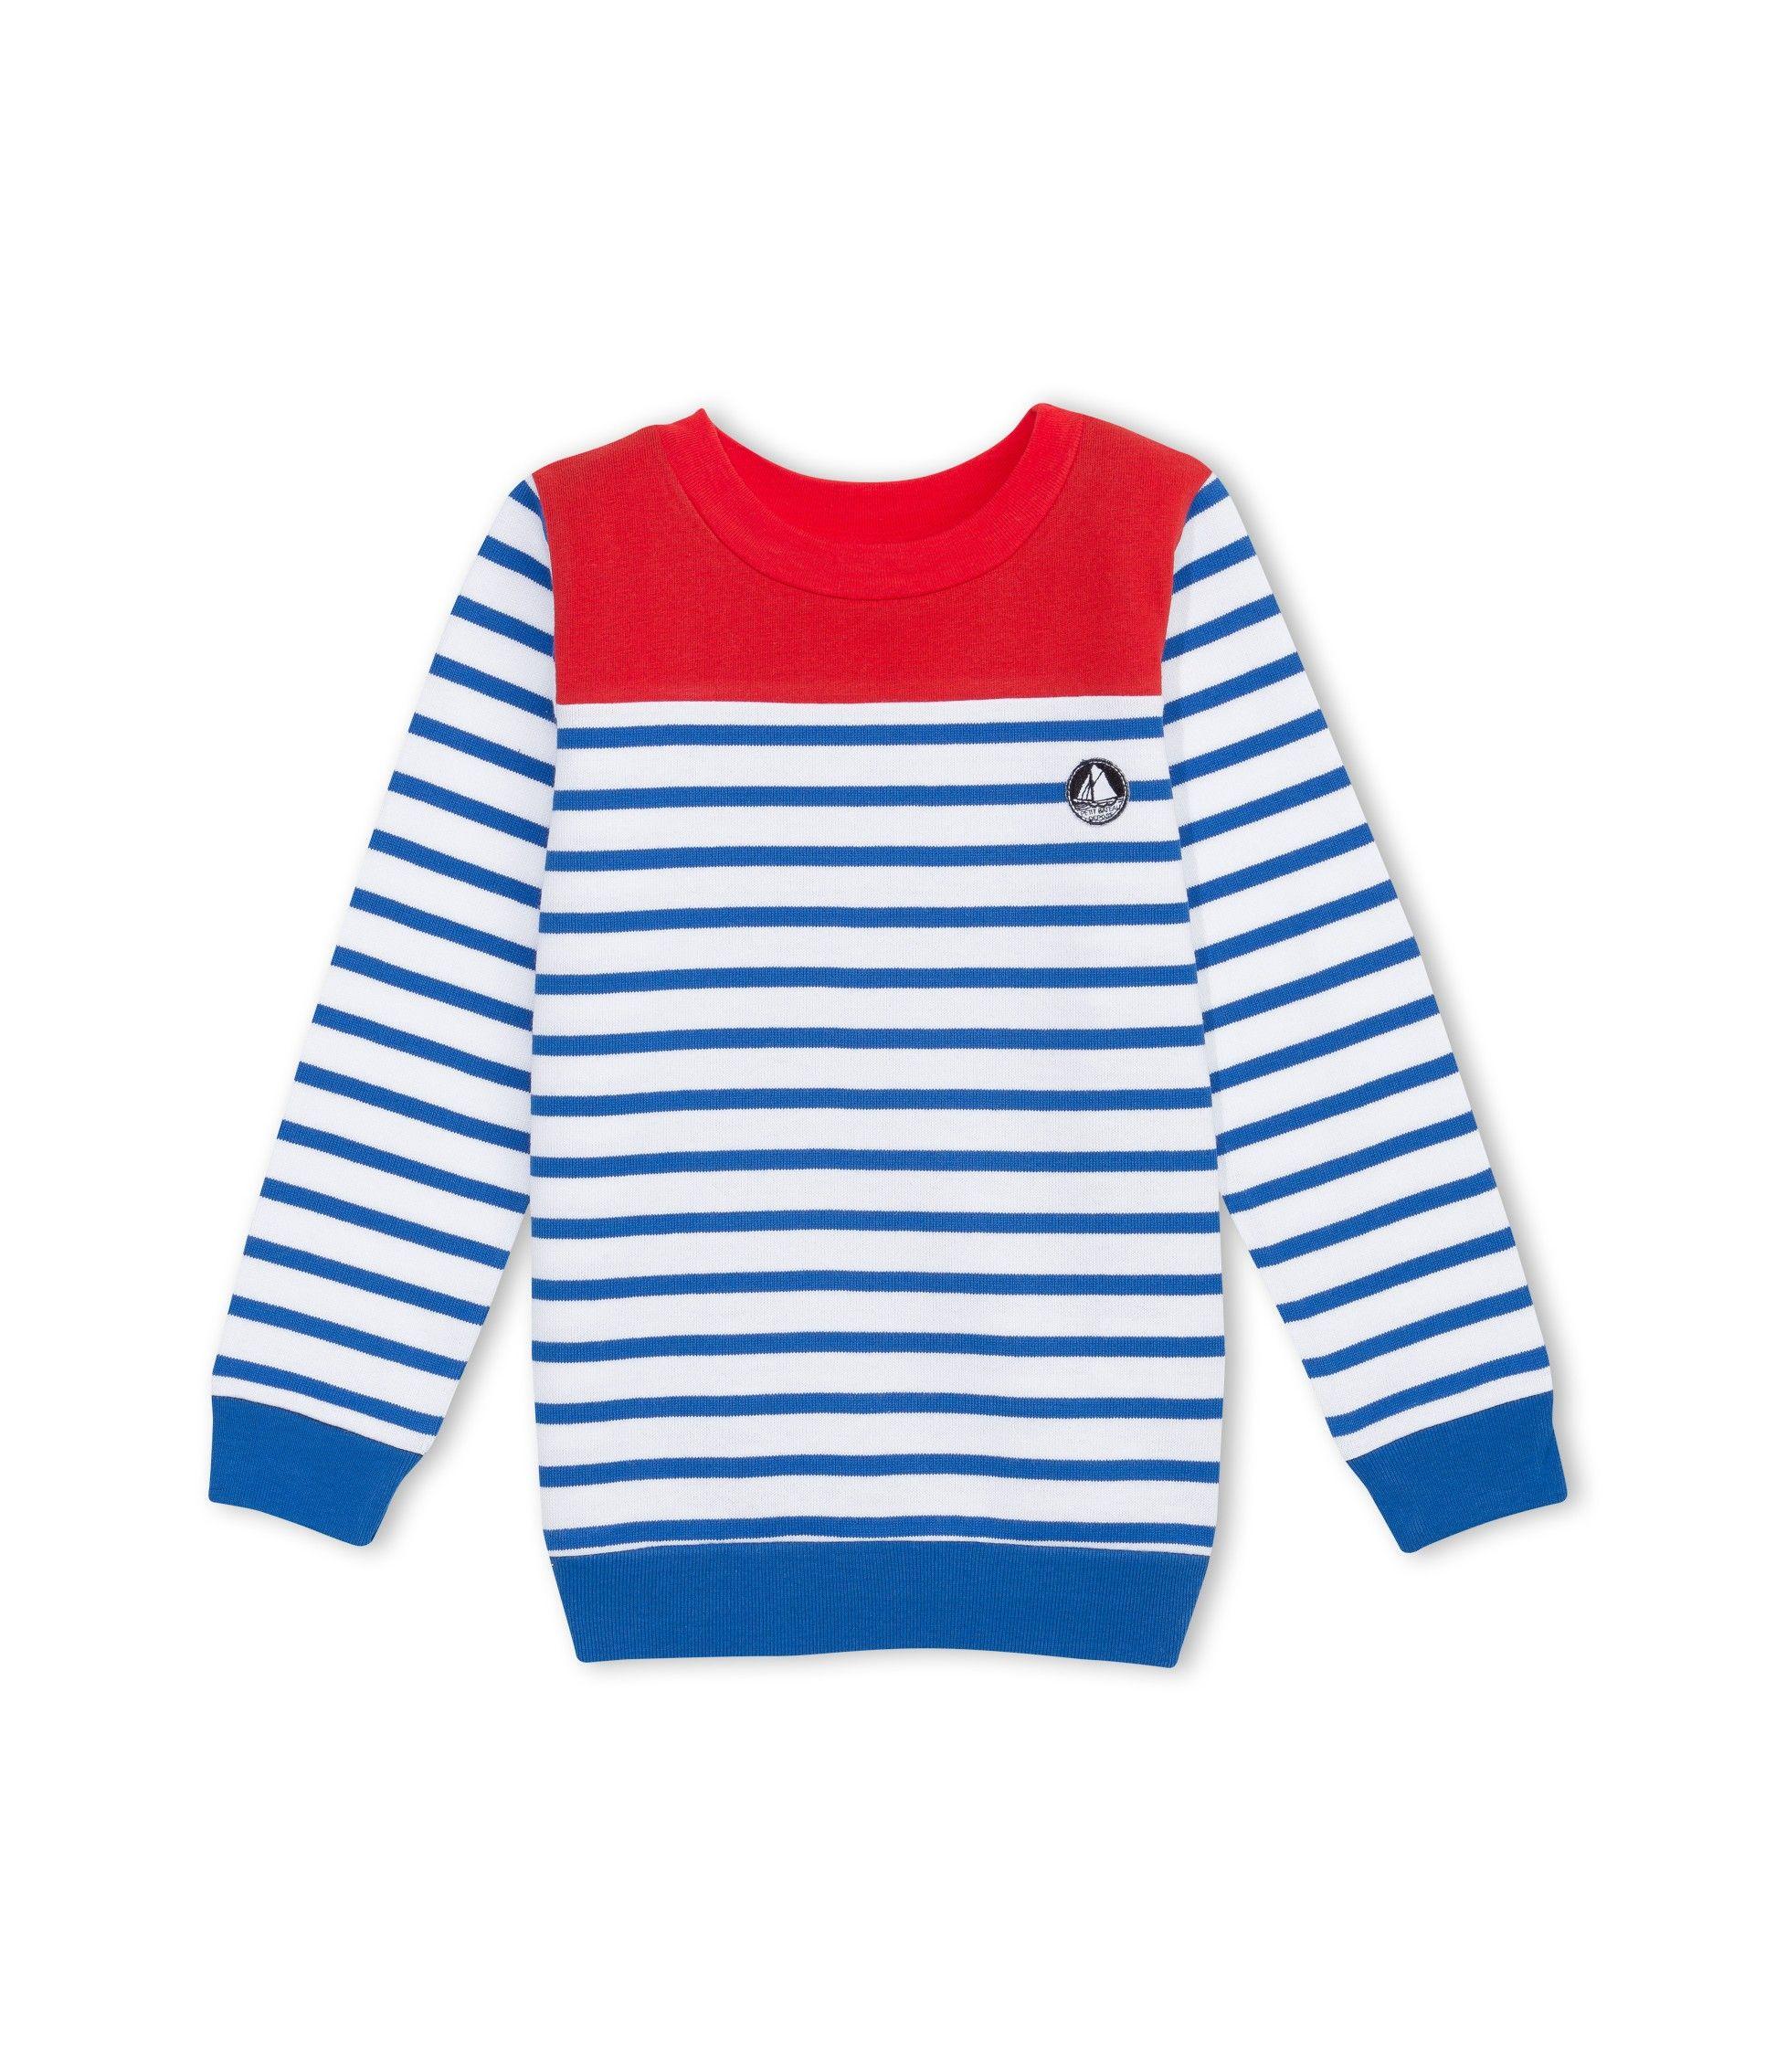 Between Red White and Blue Lines Logo - PETIT BATEAU Pullover sweatshirt boy red, white & blue sailor stripes